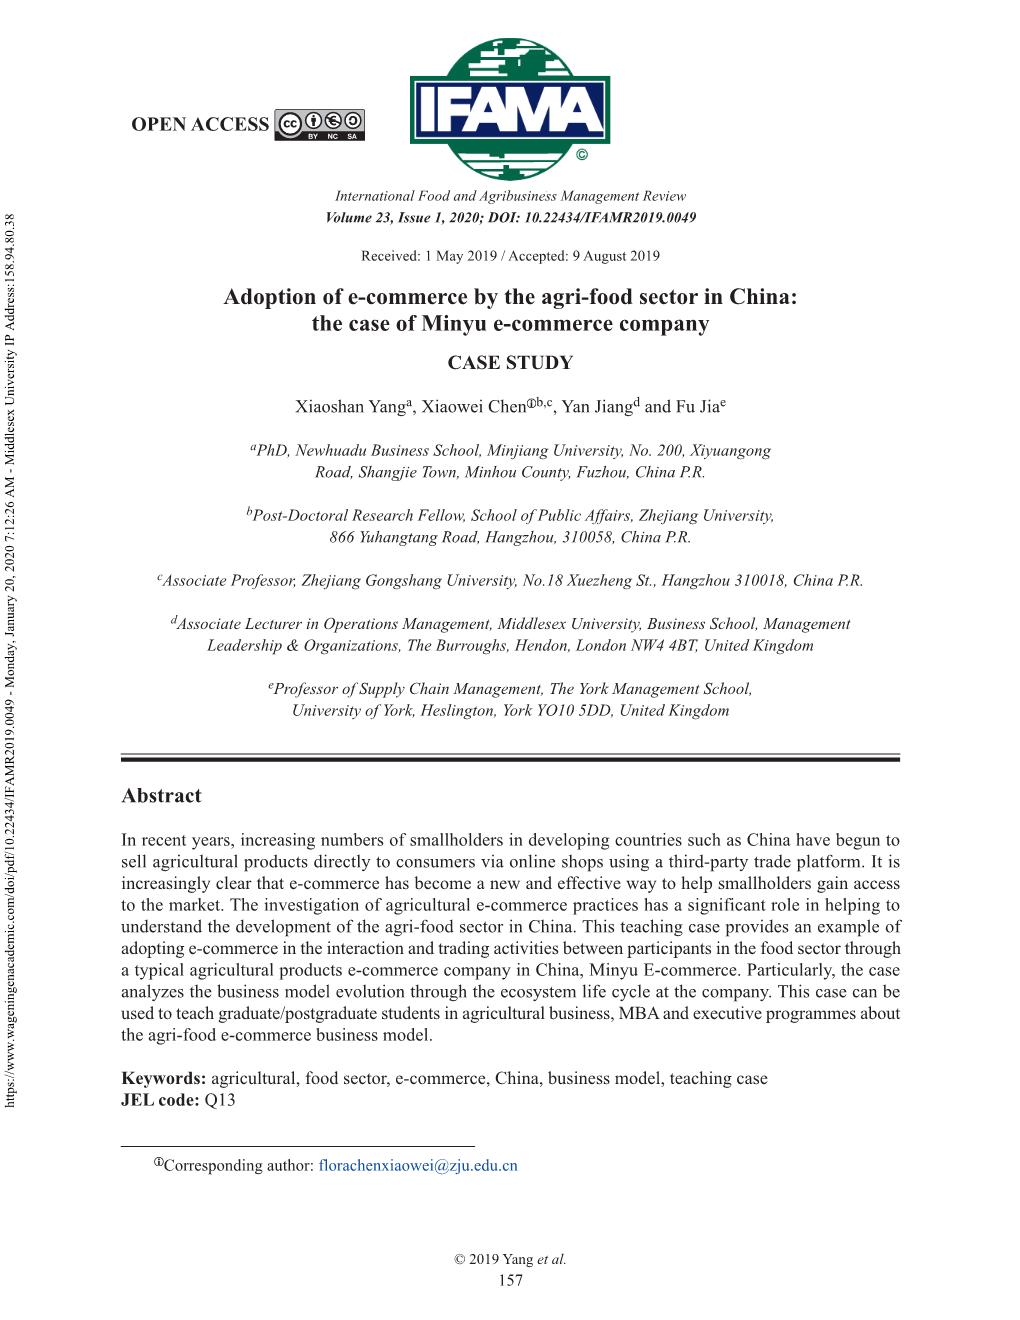 Adoption of E-Commerce by the Agri-Food Sector in China: the Case of Minyu E-Commerce Company CASE STUDY